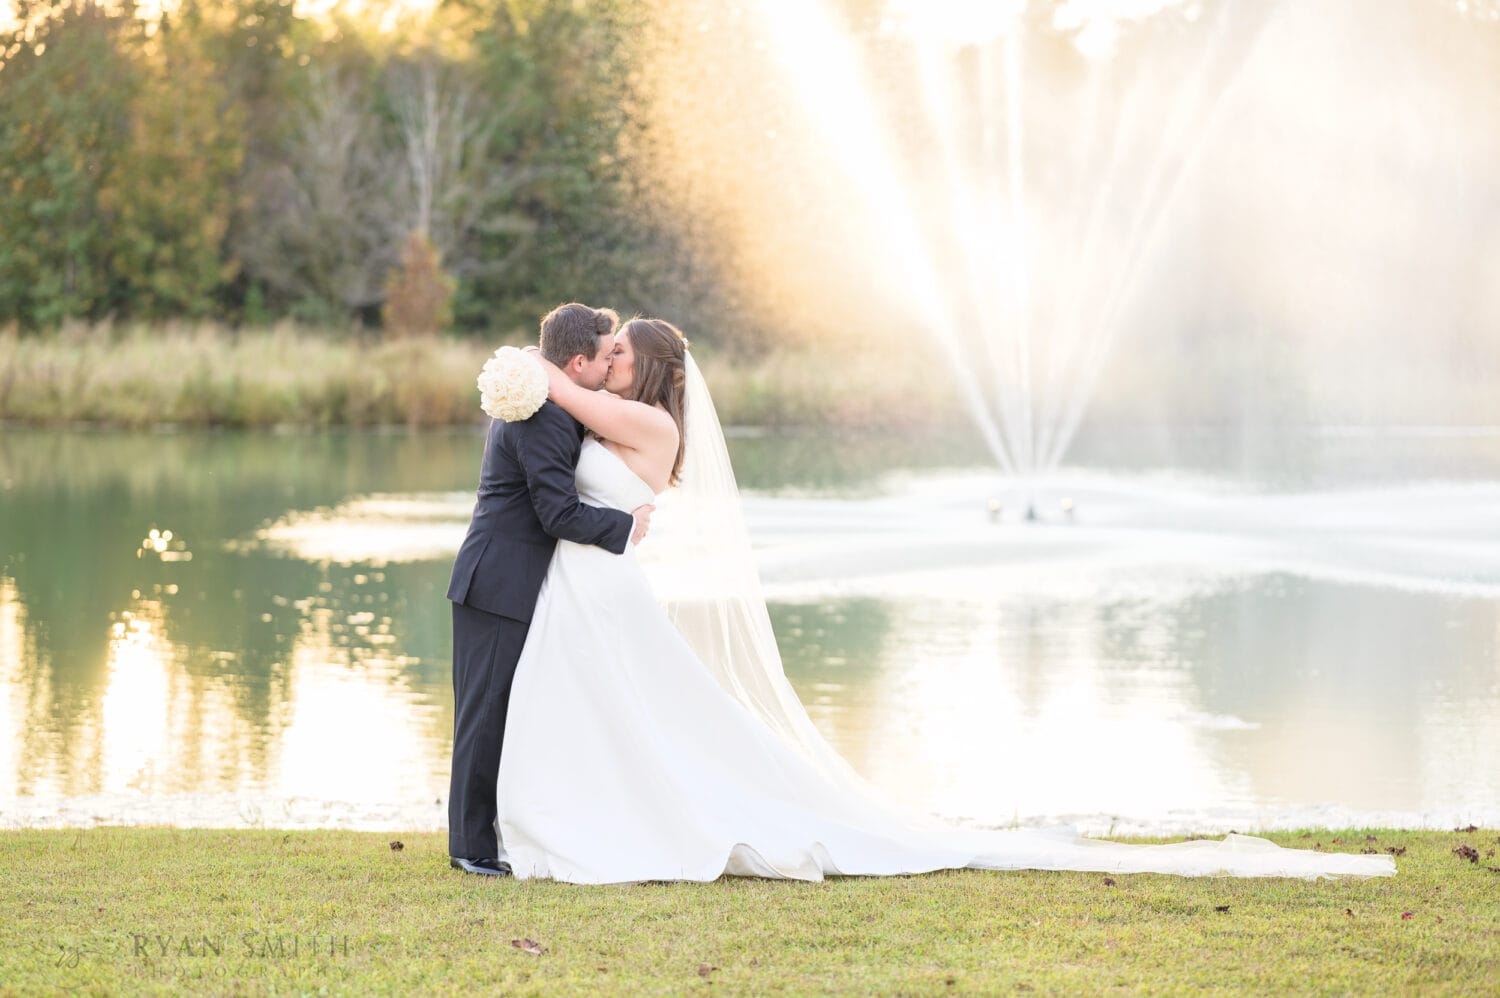 Kiss in front of the fountain - The Venue at White Oaks Farm